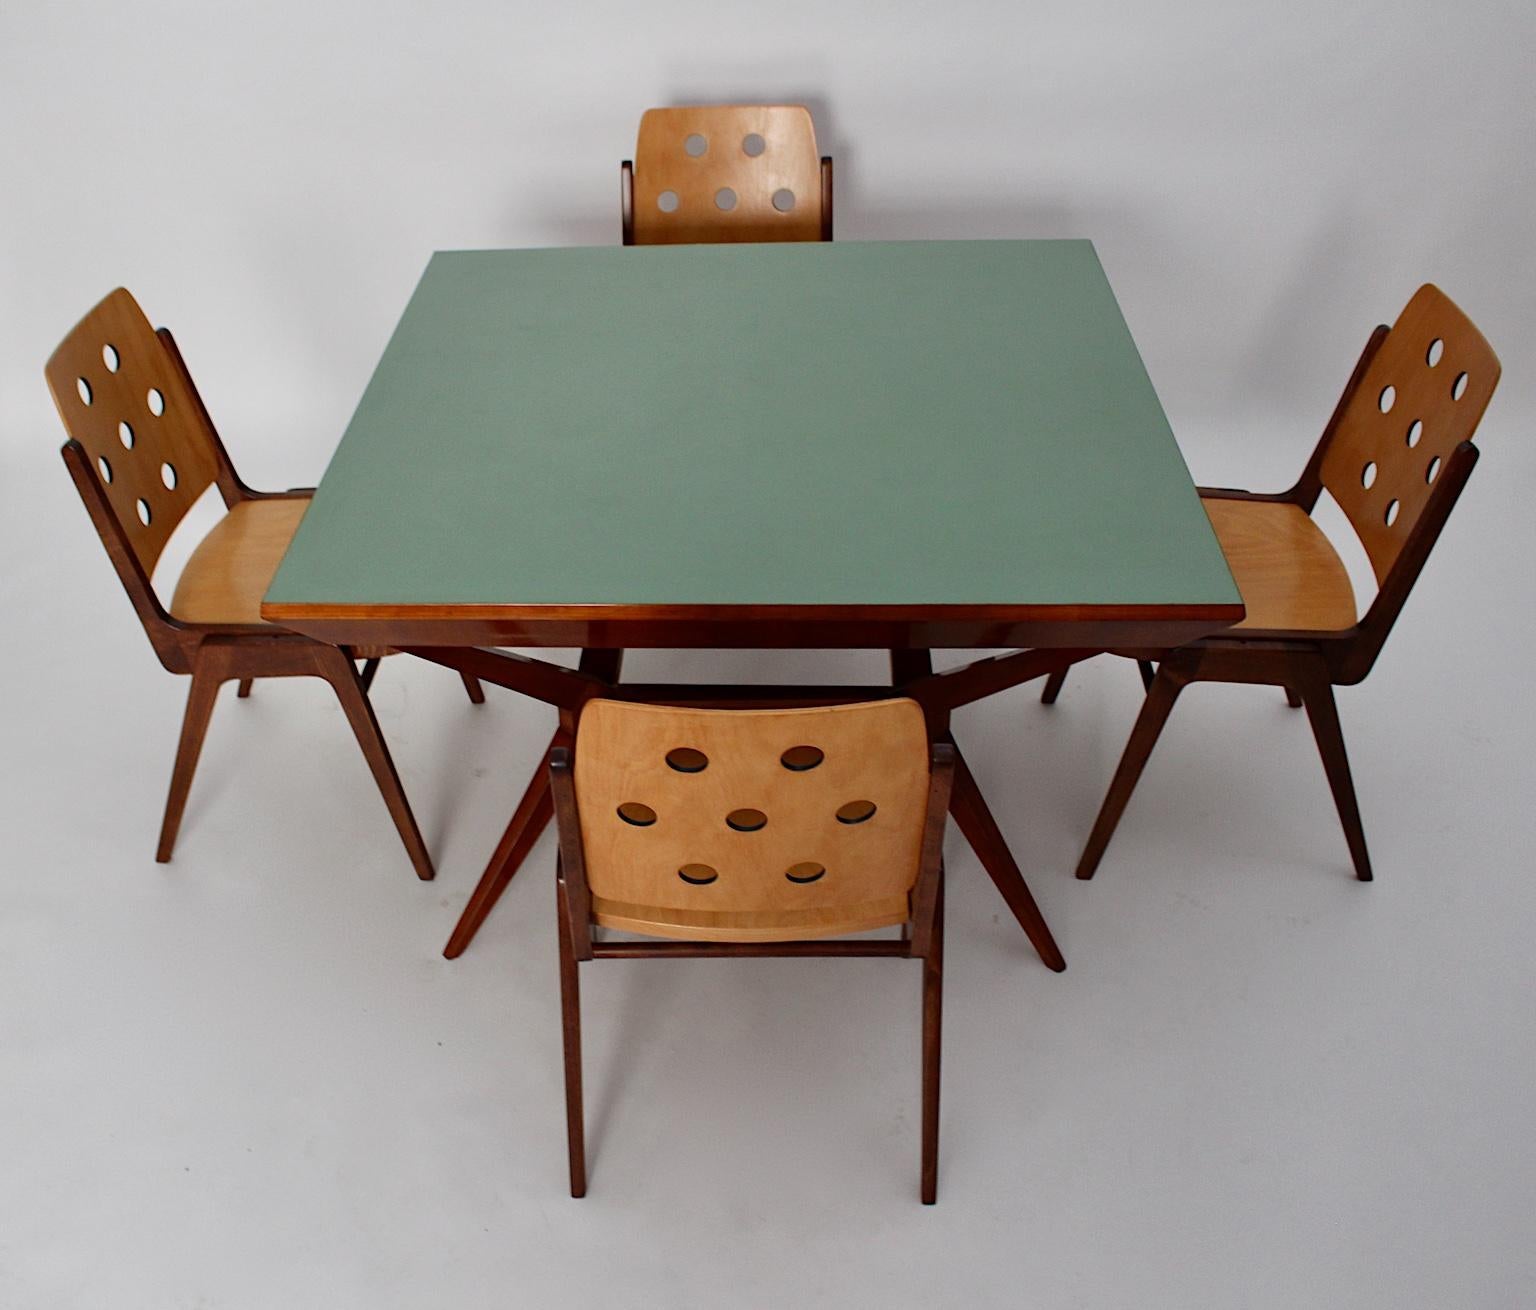 Mid-Century Modern vintage dining room set, which includes an outstanding dining table by Franz Schuster attributed and a set of 4 dining chairs by Franz Schuster 1950s Vienna.
The dining table or center table was made out of a solid cherrywood